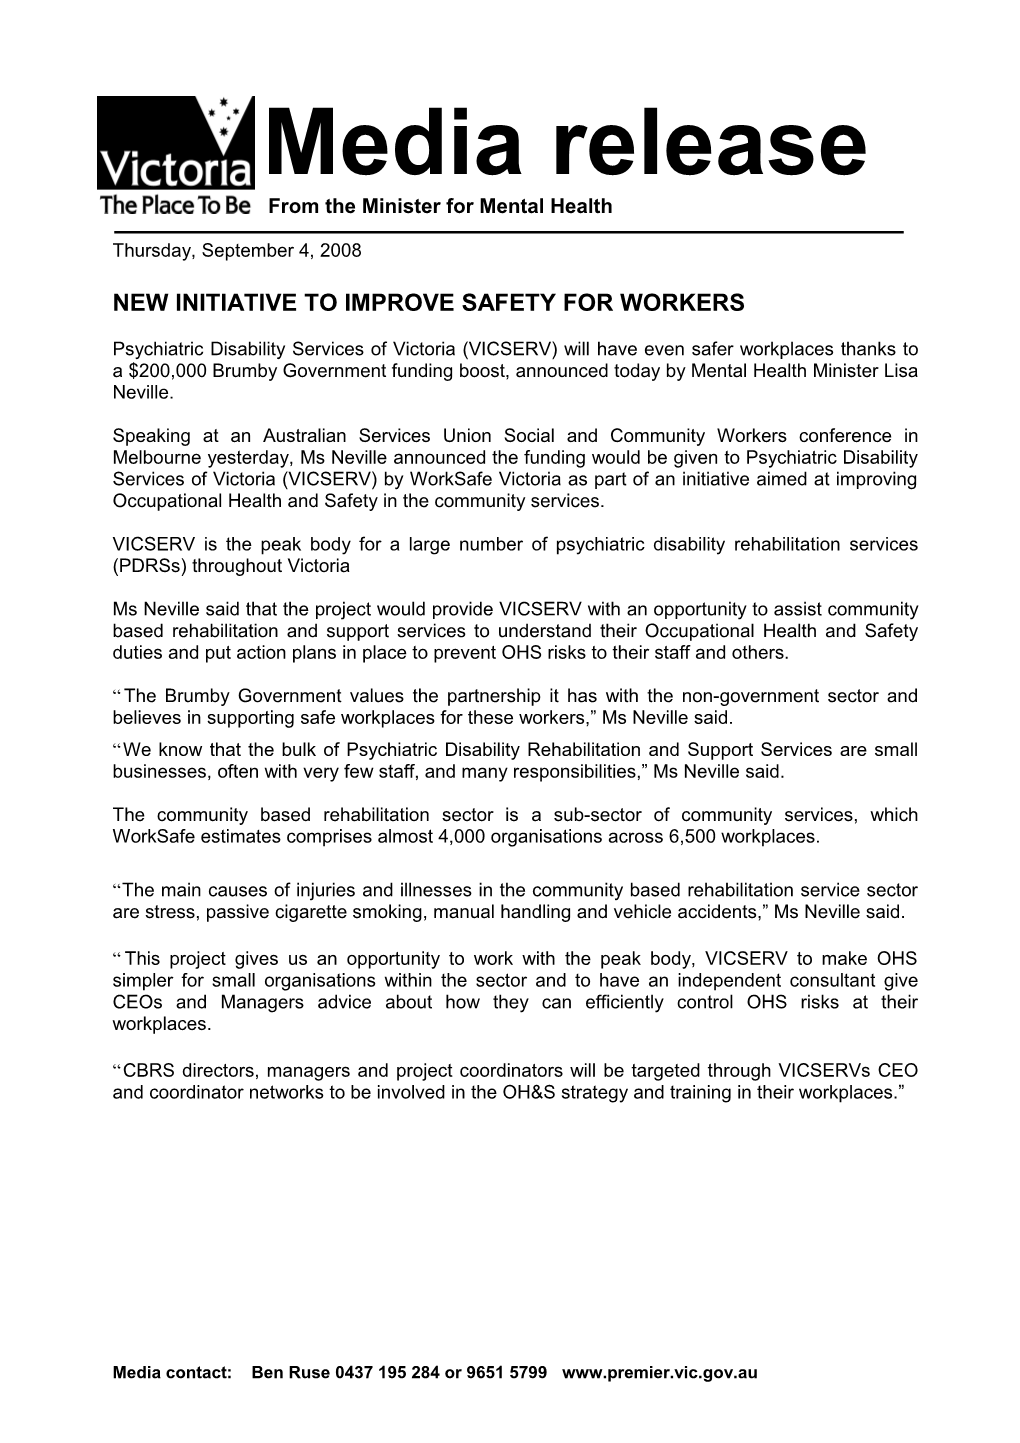 New Initiative to Improve Safety for Workers